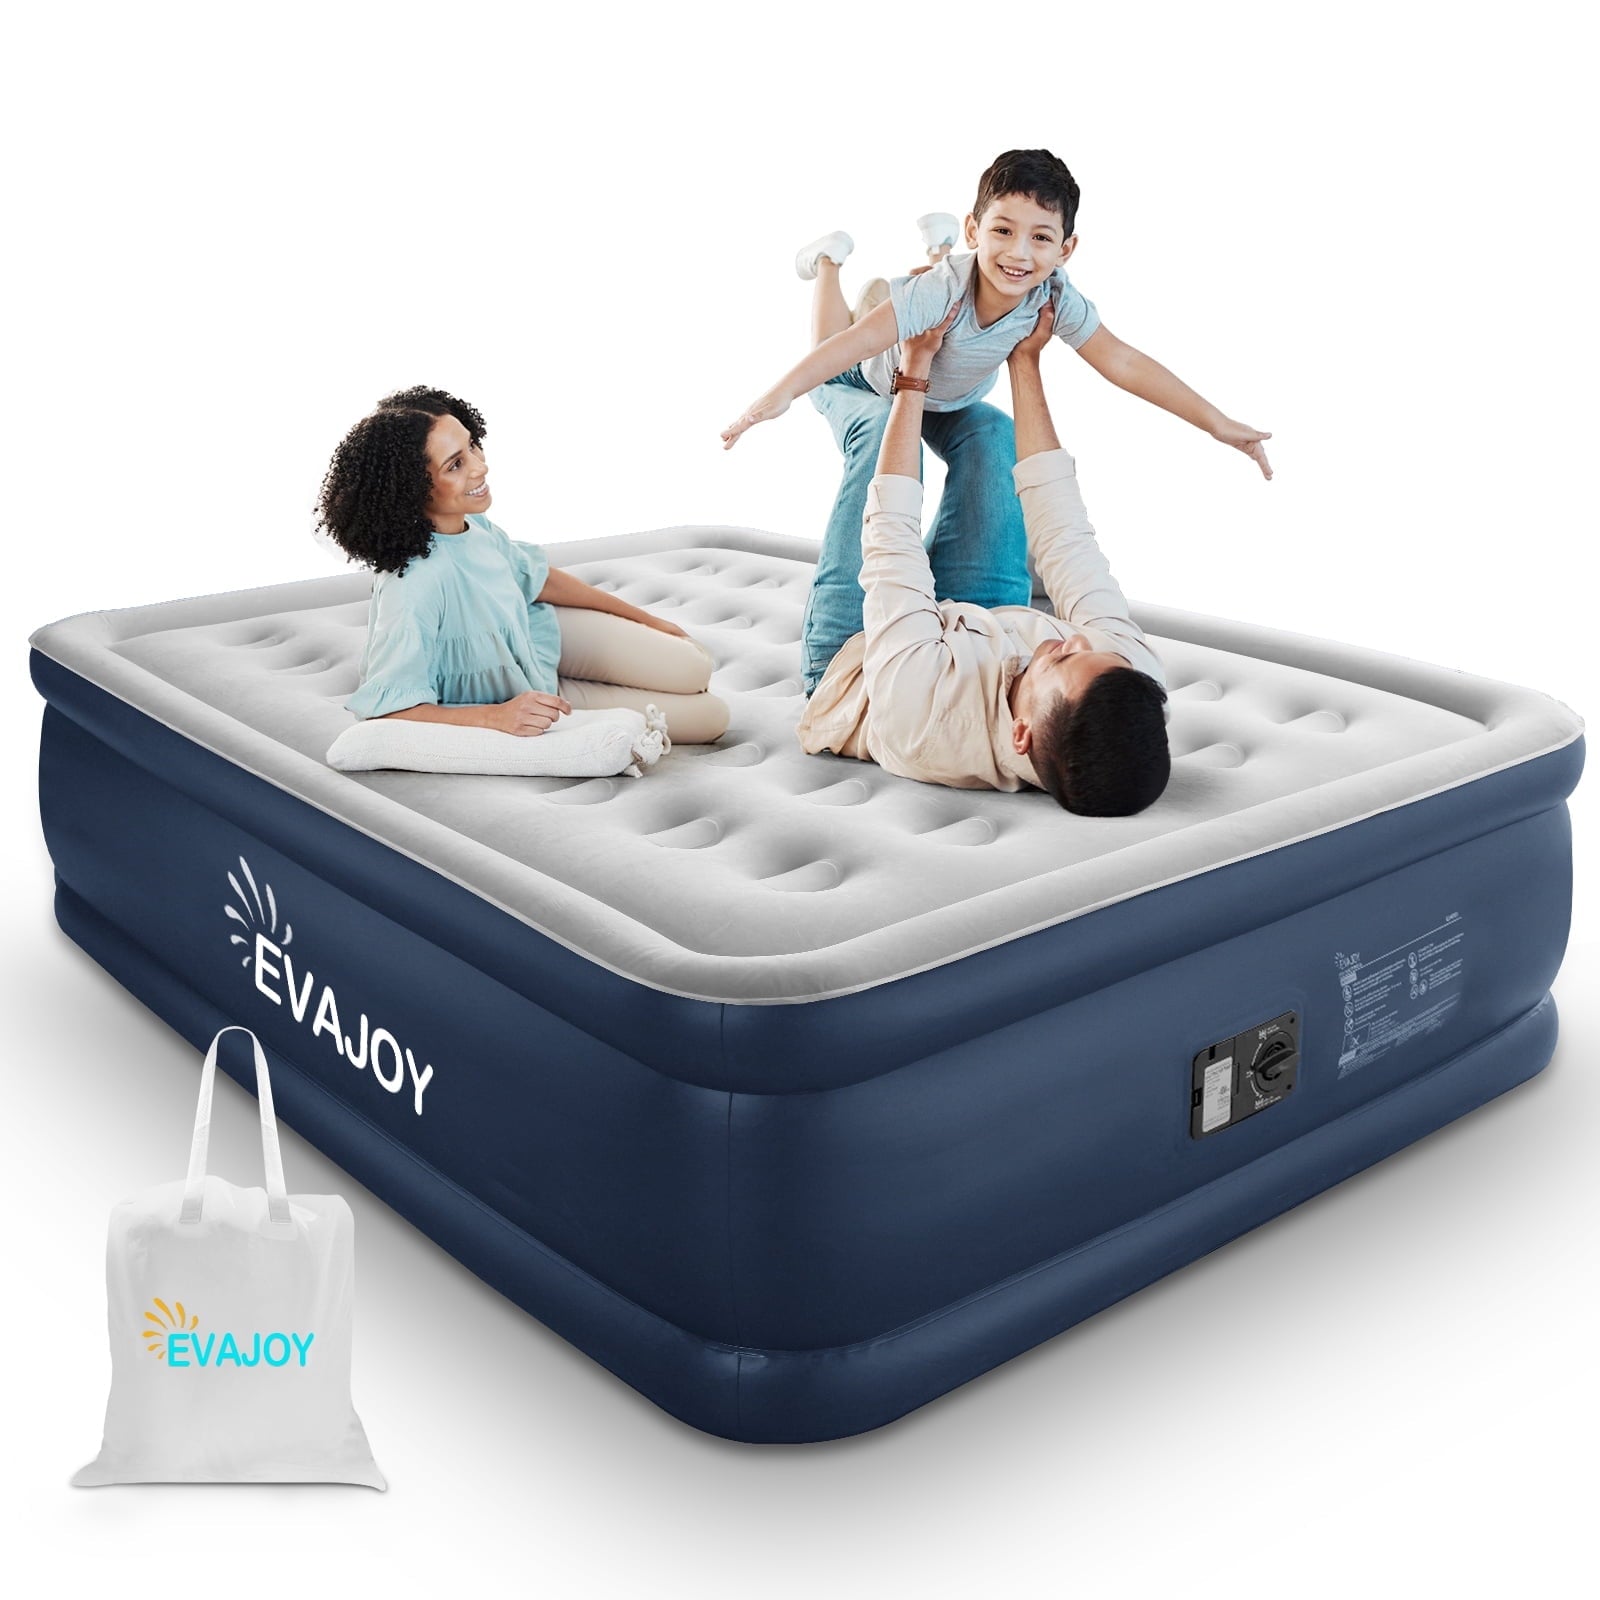 Evajoy Air Mattress, Inflatable Airbed with Built in Pump for Guest Home Camping Travel, 650lb Max, 18" Twin Size